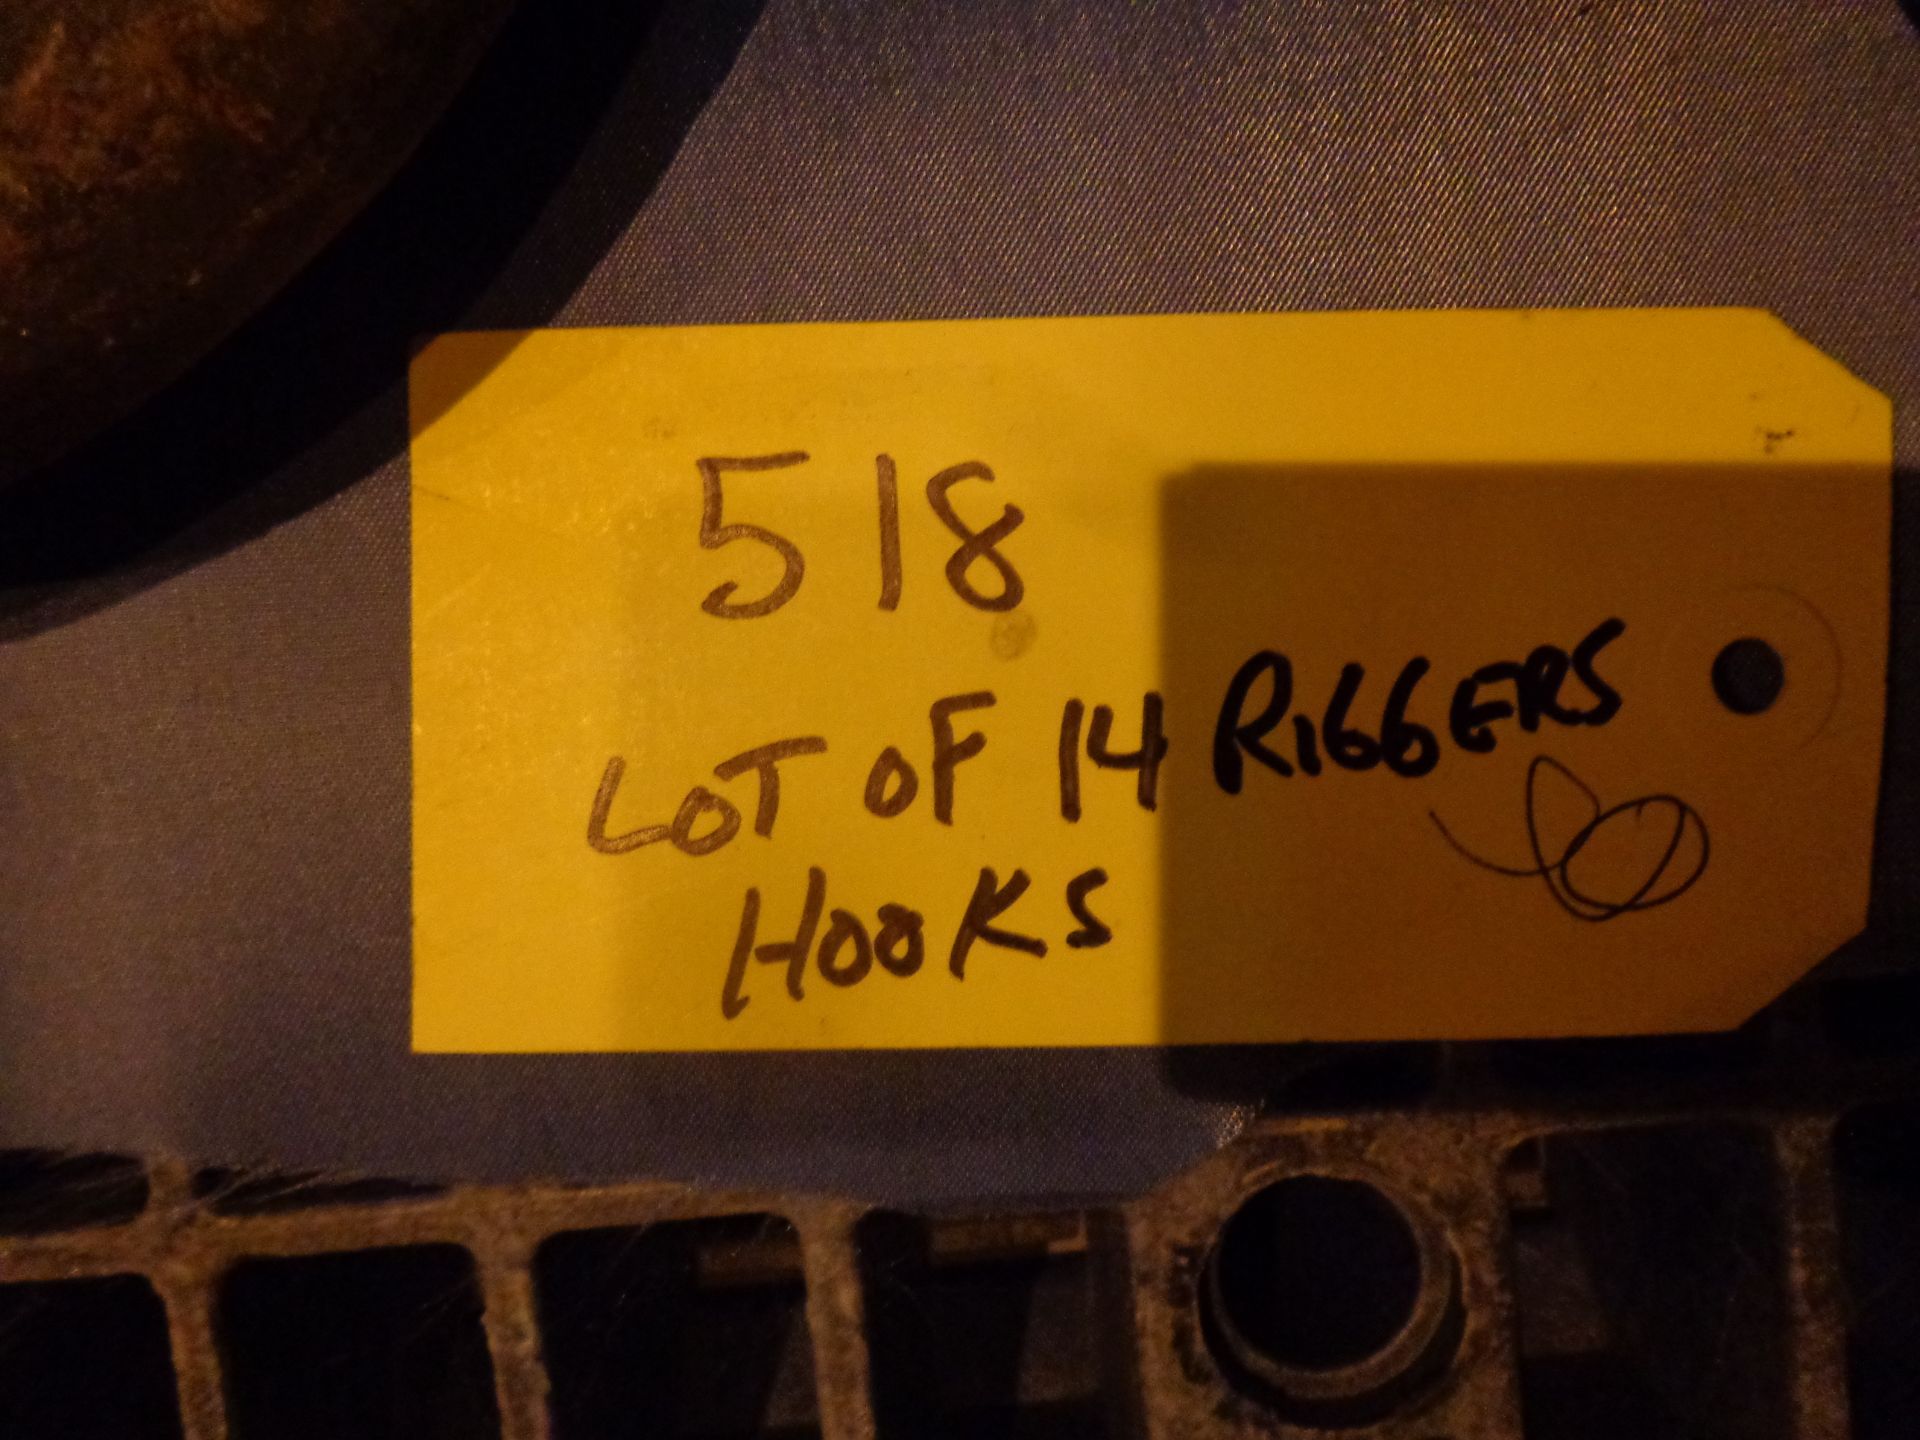 Lot of 14 Riggers Hooks (#518) - Image 7 of 8